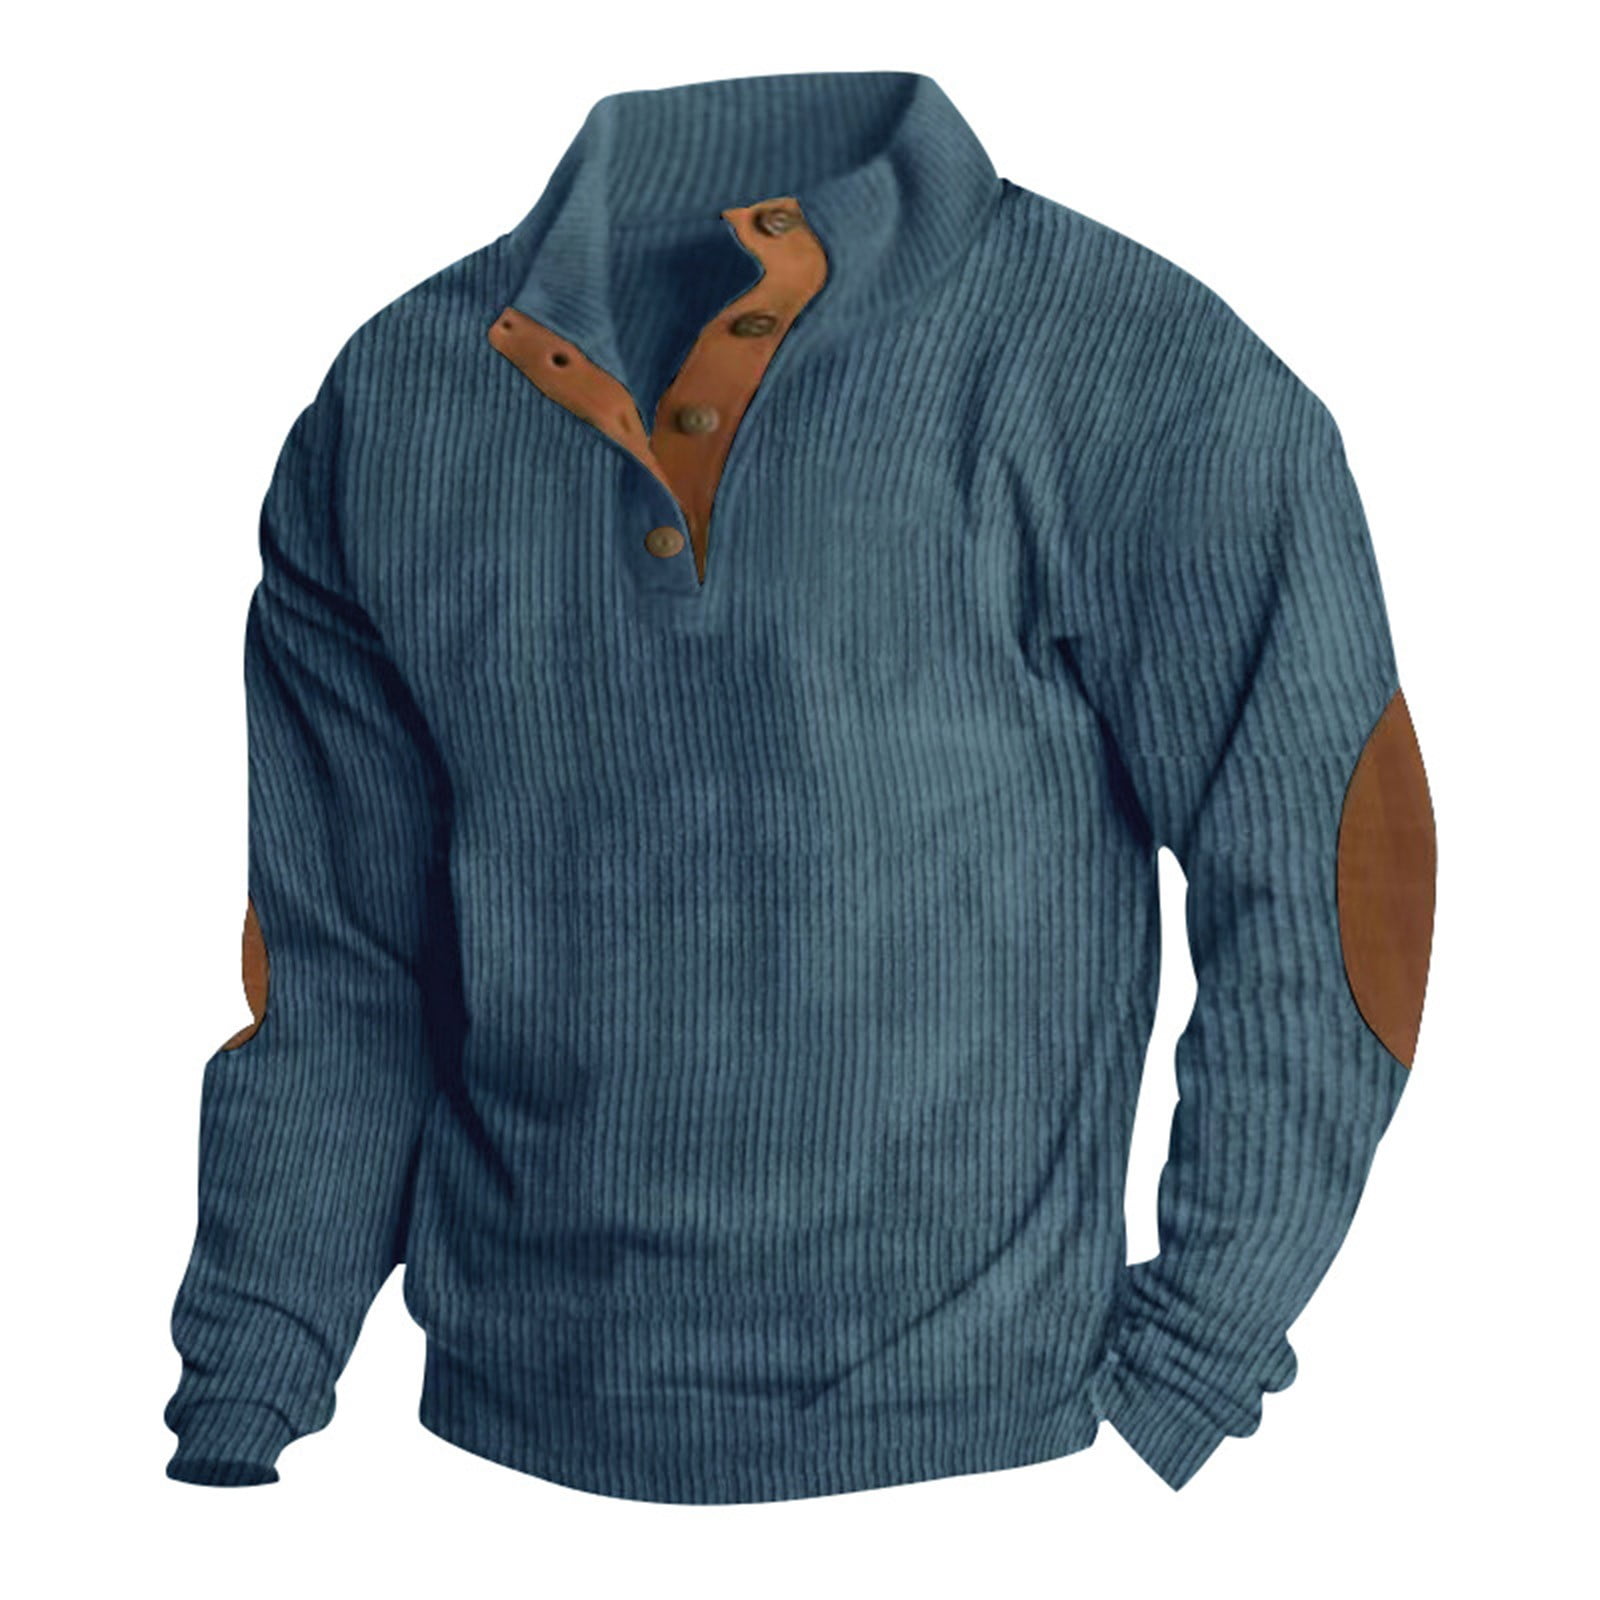 Orvis Men's Out-Of-Office Long Sleeve Fishing Shirt - Blue Gingham L by Sportsman's Warehouse